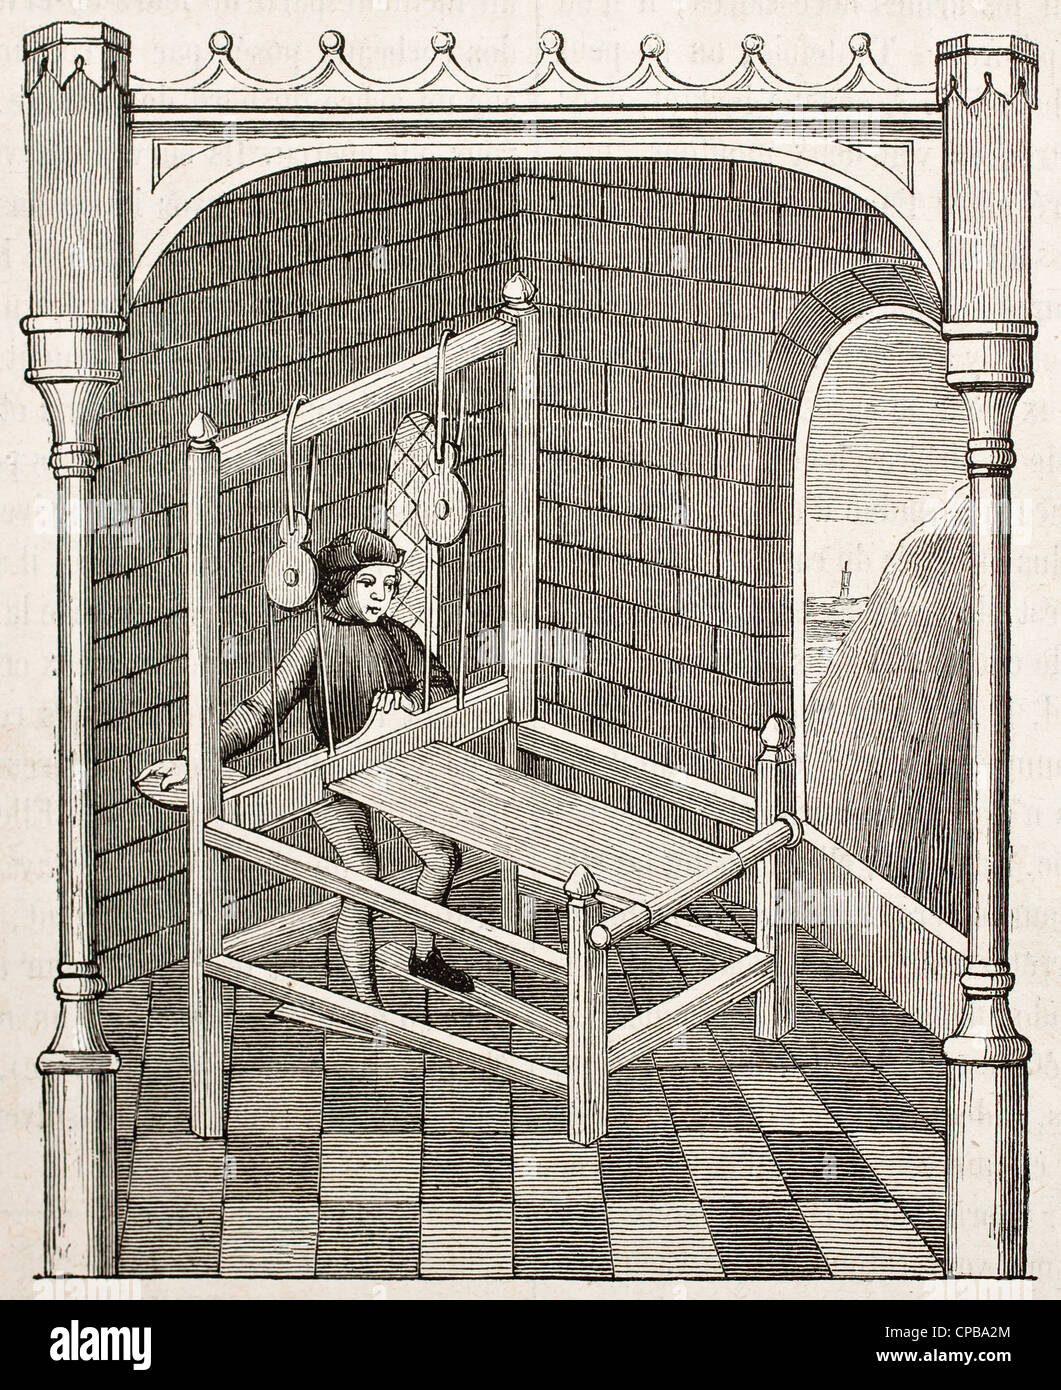 14th century weaver working on the loom, old illustration Stock Photo